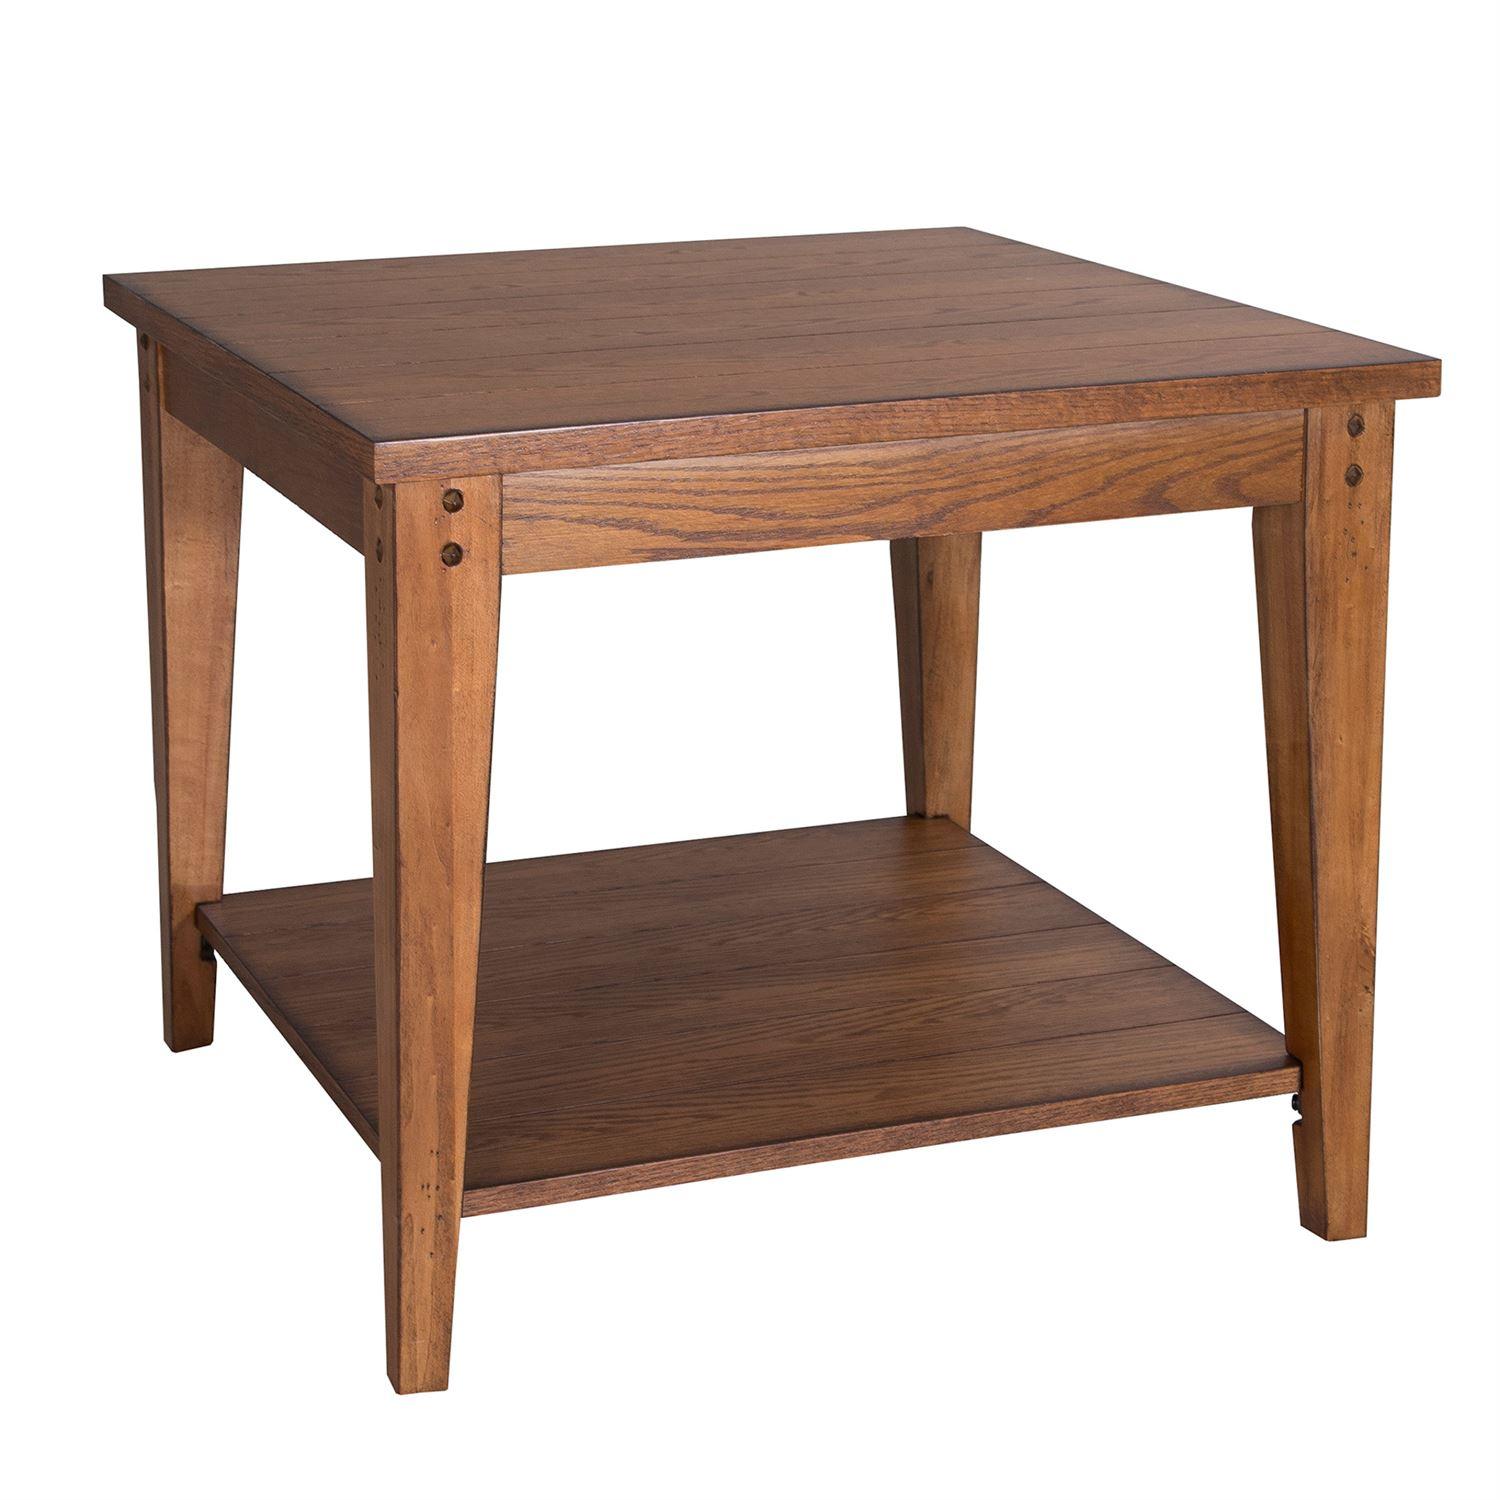 Rustic End Table Lake House  (110-OT) End Table 110-OT1023 in Oak Veneers, Brown Lacquer